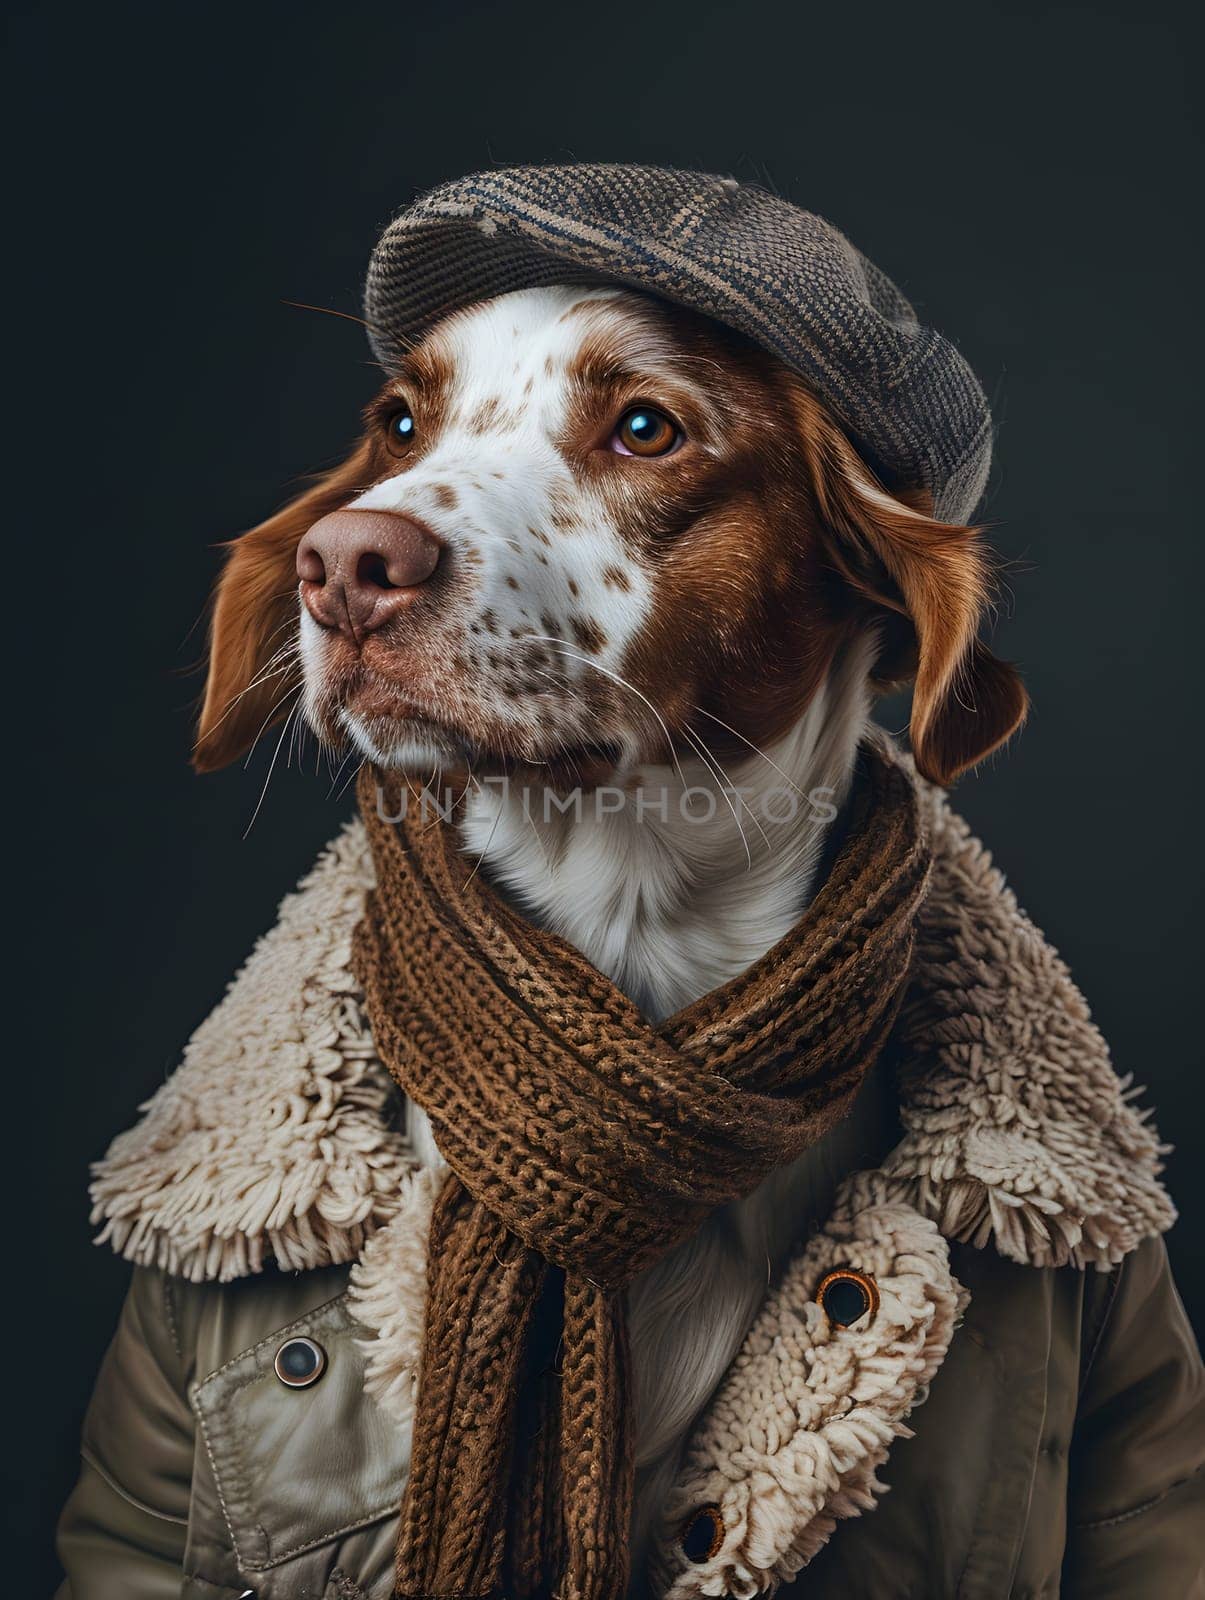 A liver and white Braque Francais, a dog breed known for its excellent hunting skills, wearing a hat and scarf, posing for a painting as a working animal and companion dog